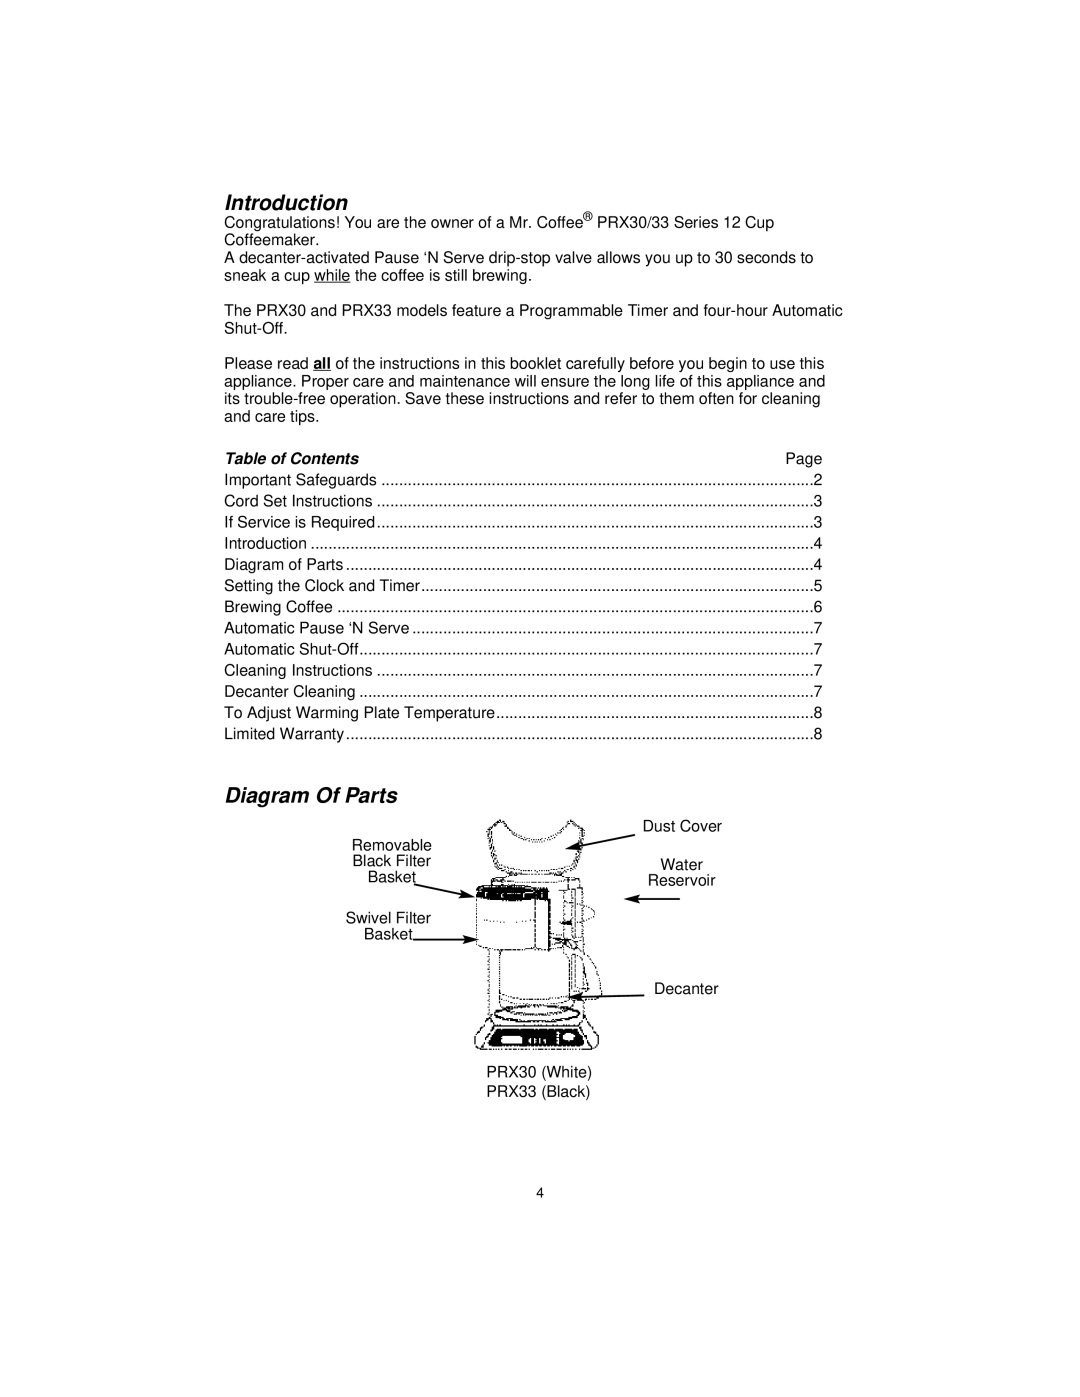 Mr. Coffee PRX30 manual Introduction, Diagram Of Parts, Table of Contents 